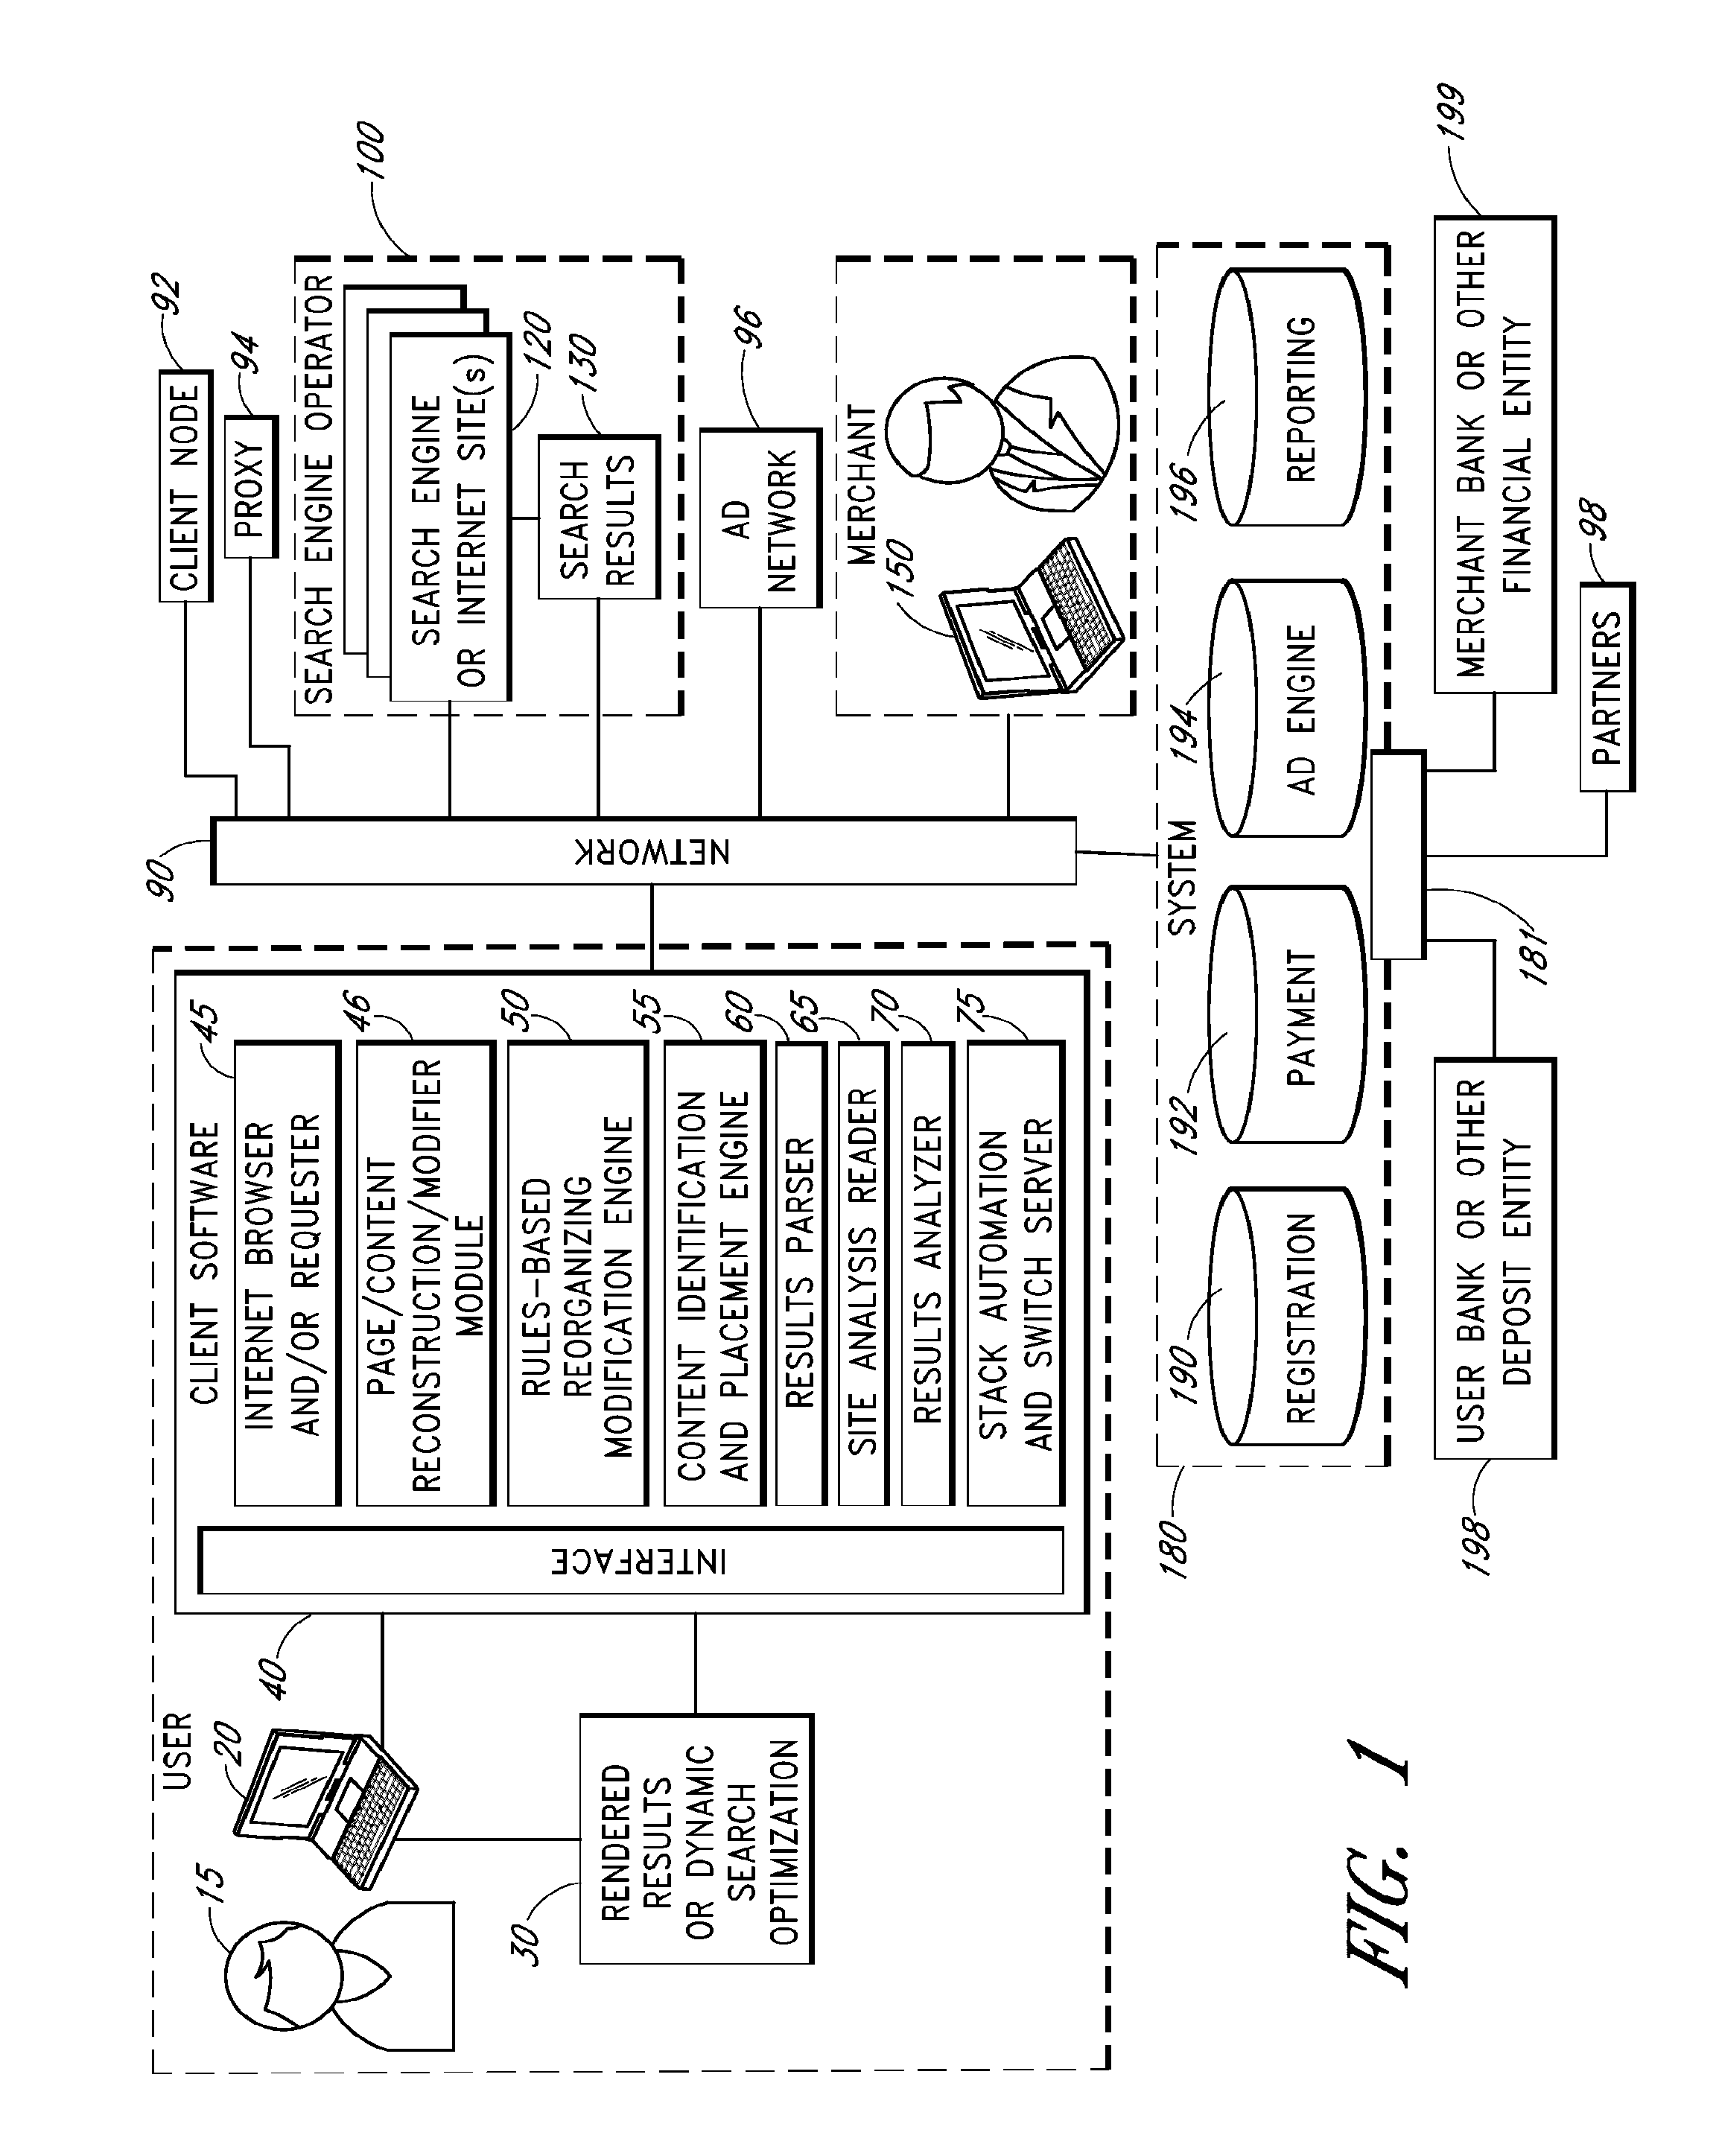 Methods and systems for searching, selecting, and displaying content